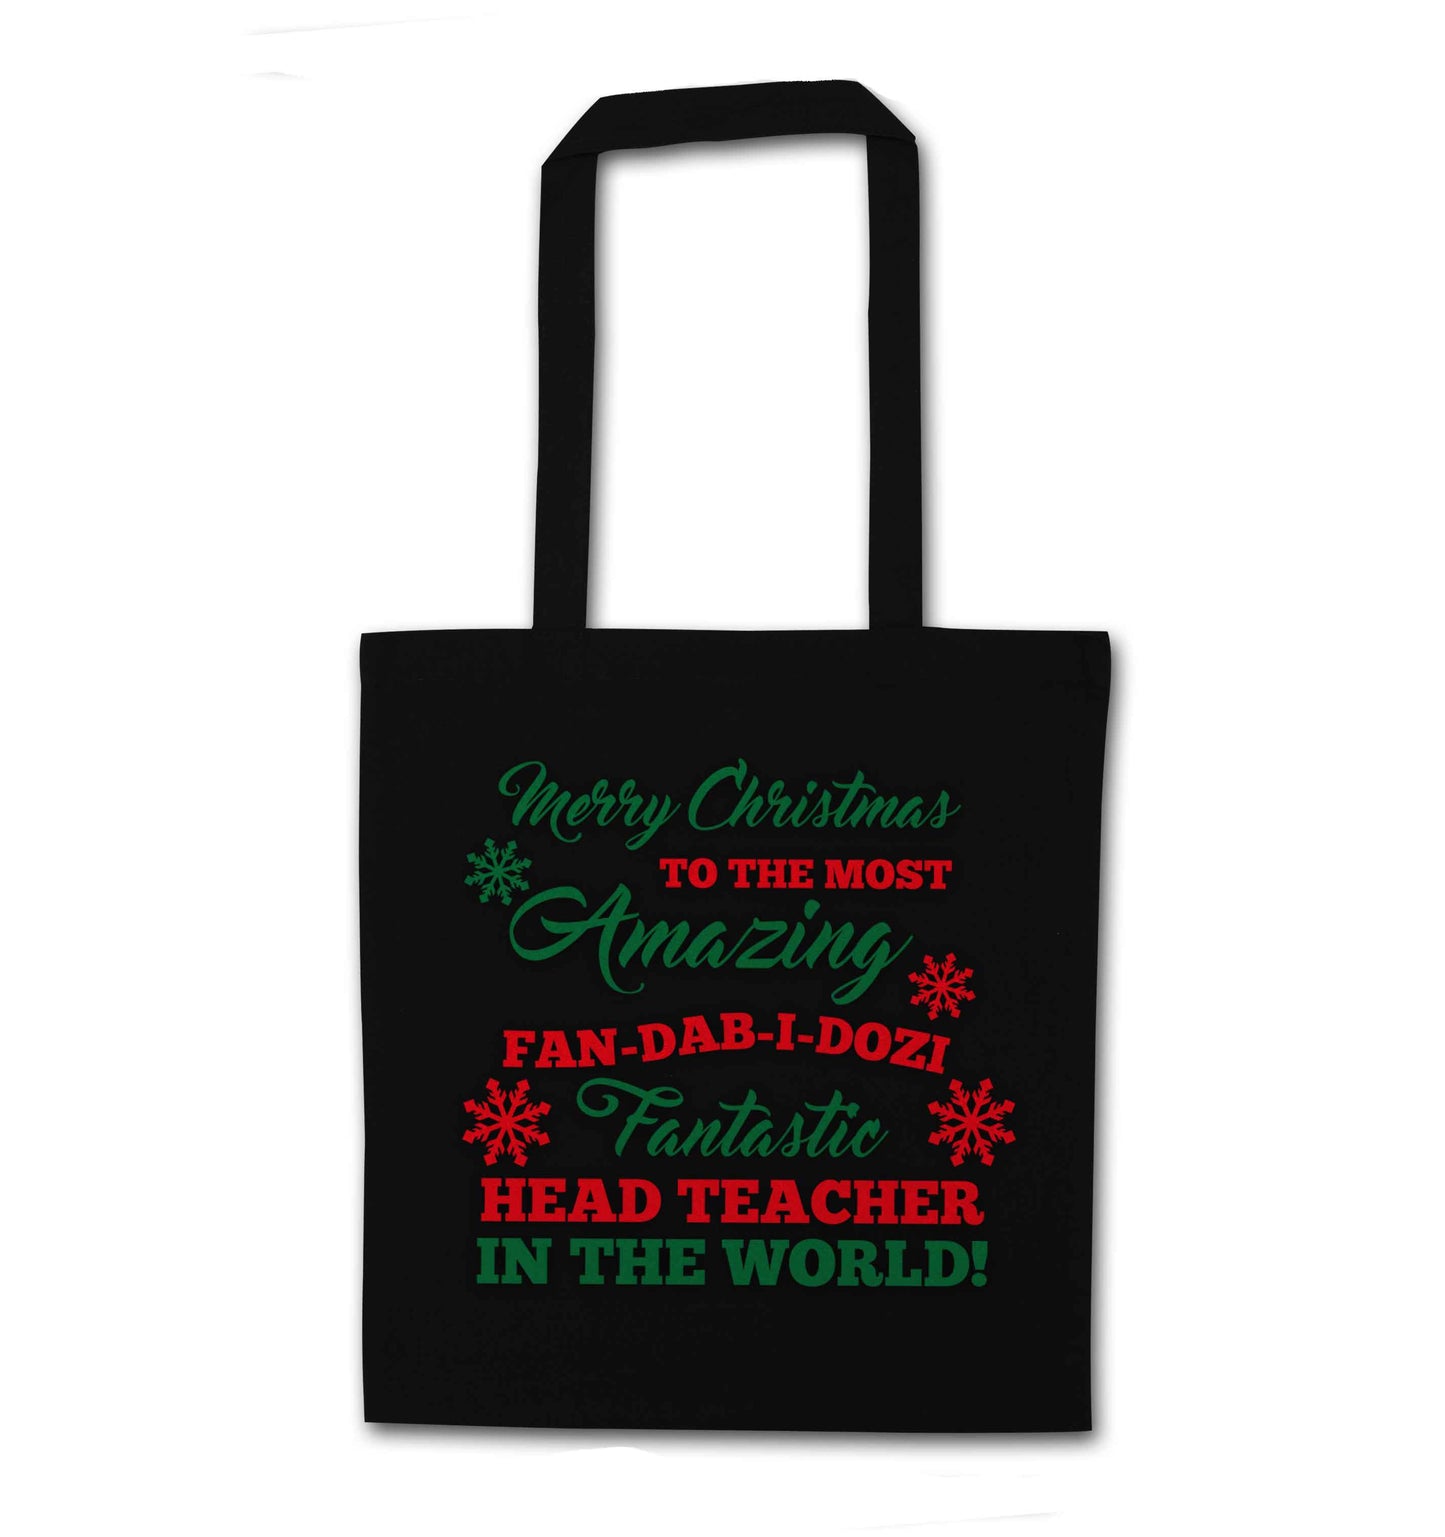 Merry Christmas to the most amazing fan-dab-i-dozi fantasic head teacher in the world black tote bag